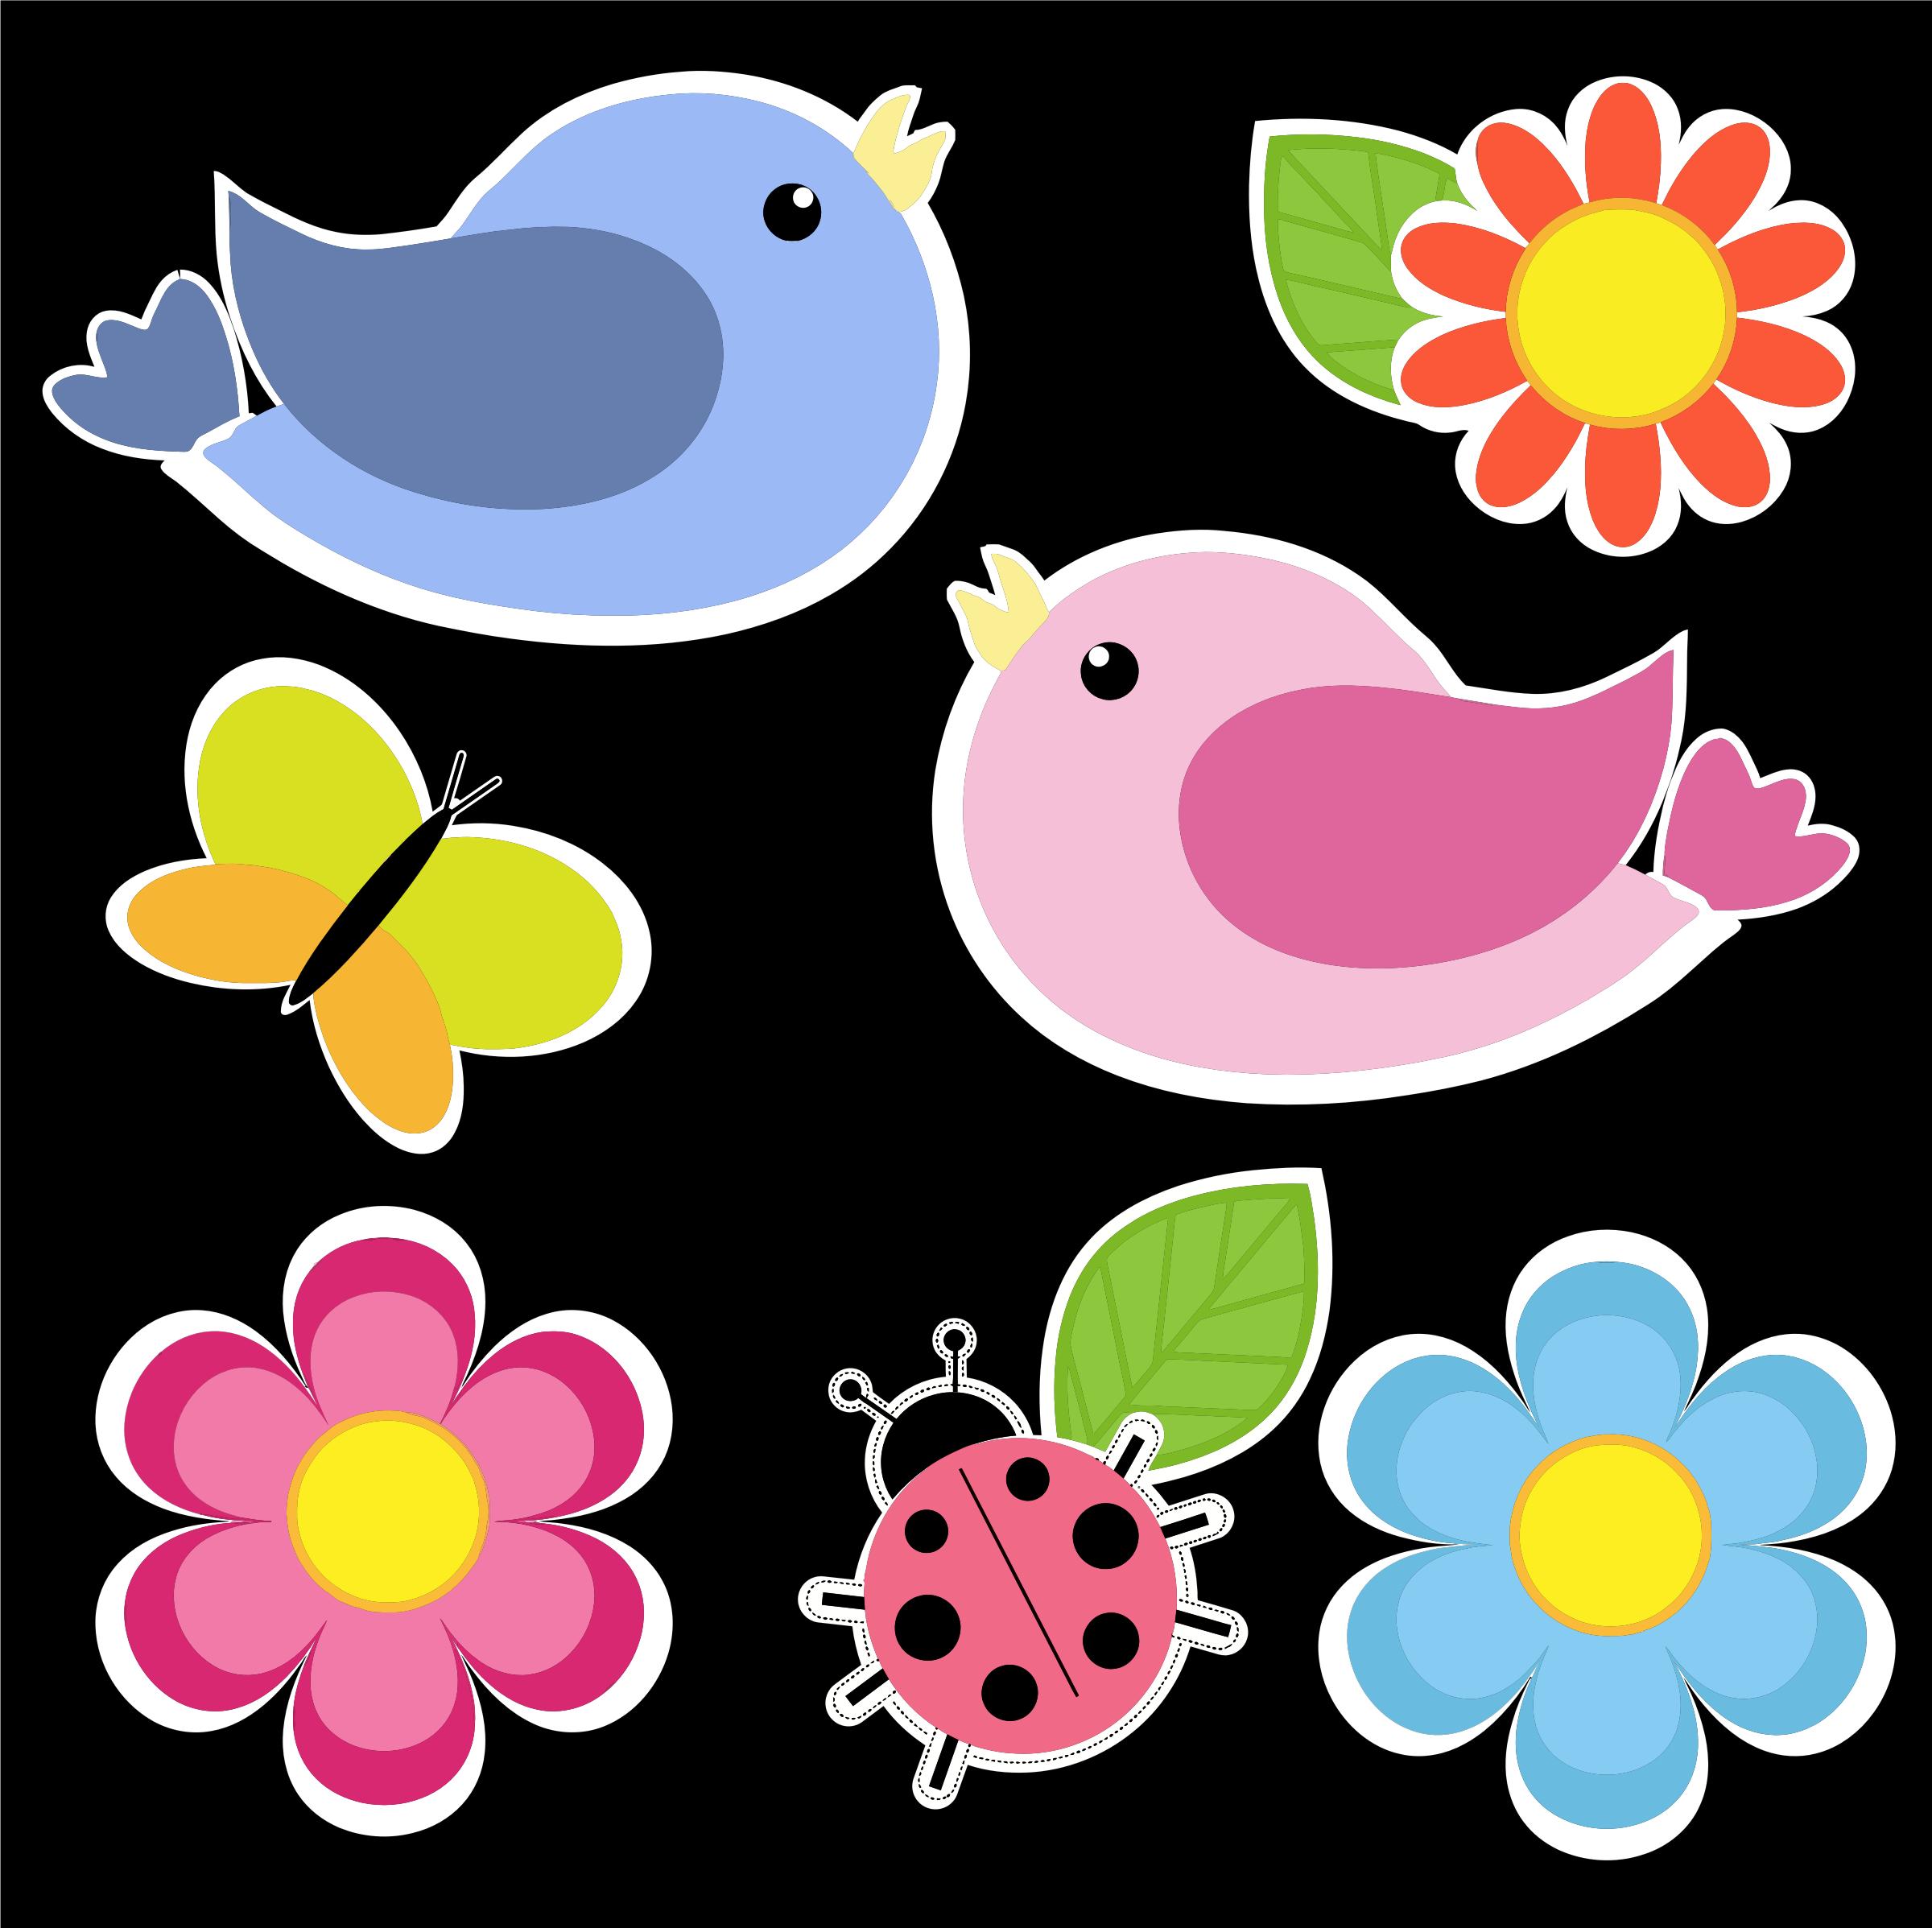 Birds Butterfly Ladybug And Flowers png